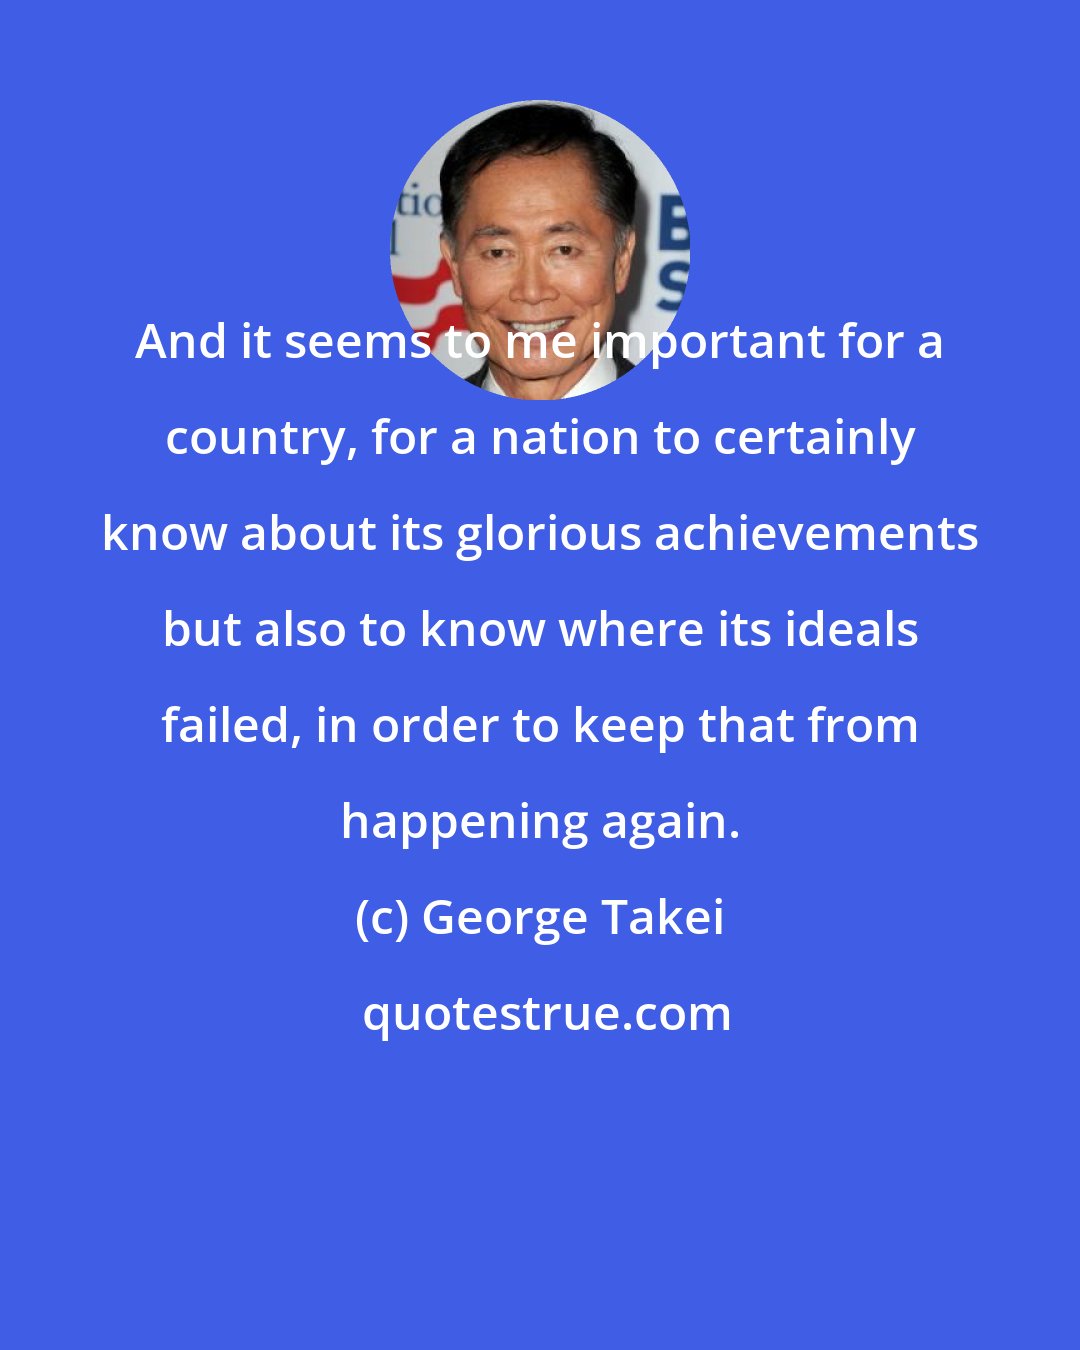 George Takei: And it seems to me important for a country, for a nation to certainly know about its glorious achievements but also to know where its ideals failed, in order to keep that from happening again.